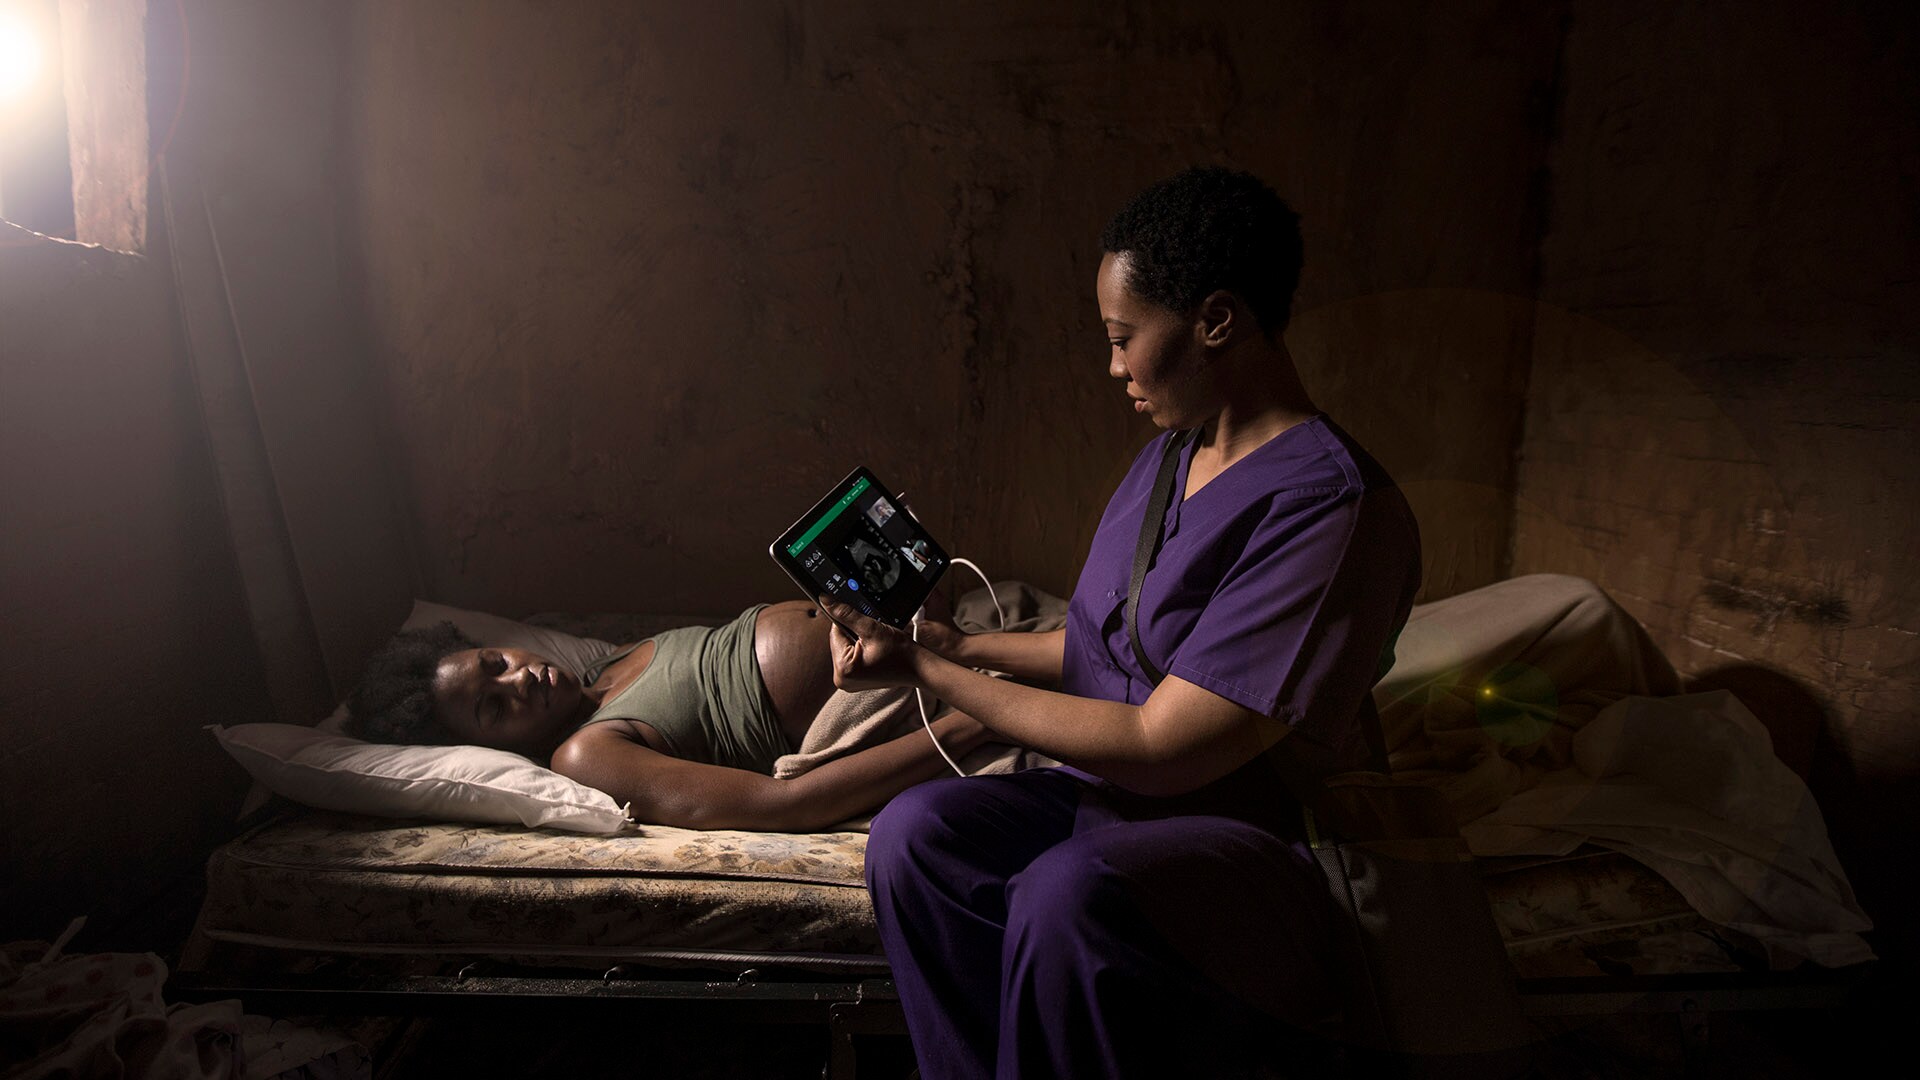 Philips Foundation and RAD-AID International embark on a multi-year cross-continental partnership to increase access to ultrasound services for 50 million people in low- and middle-income countries